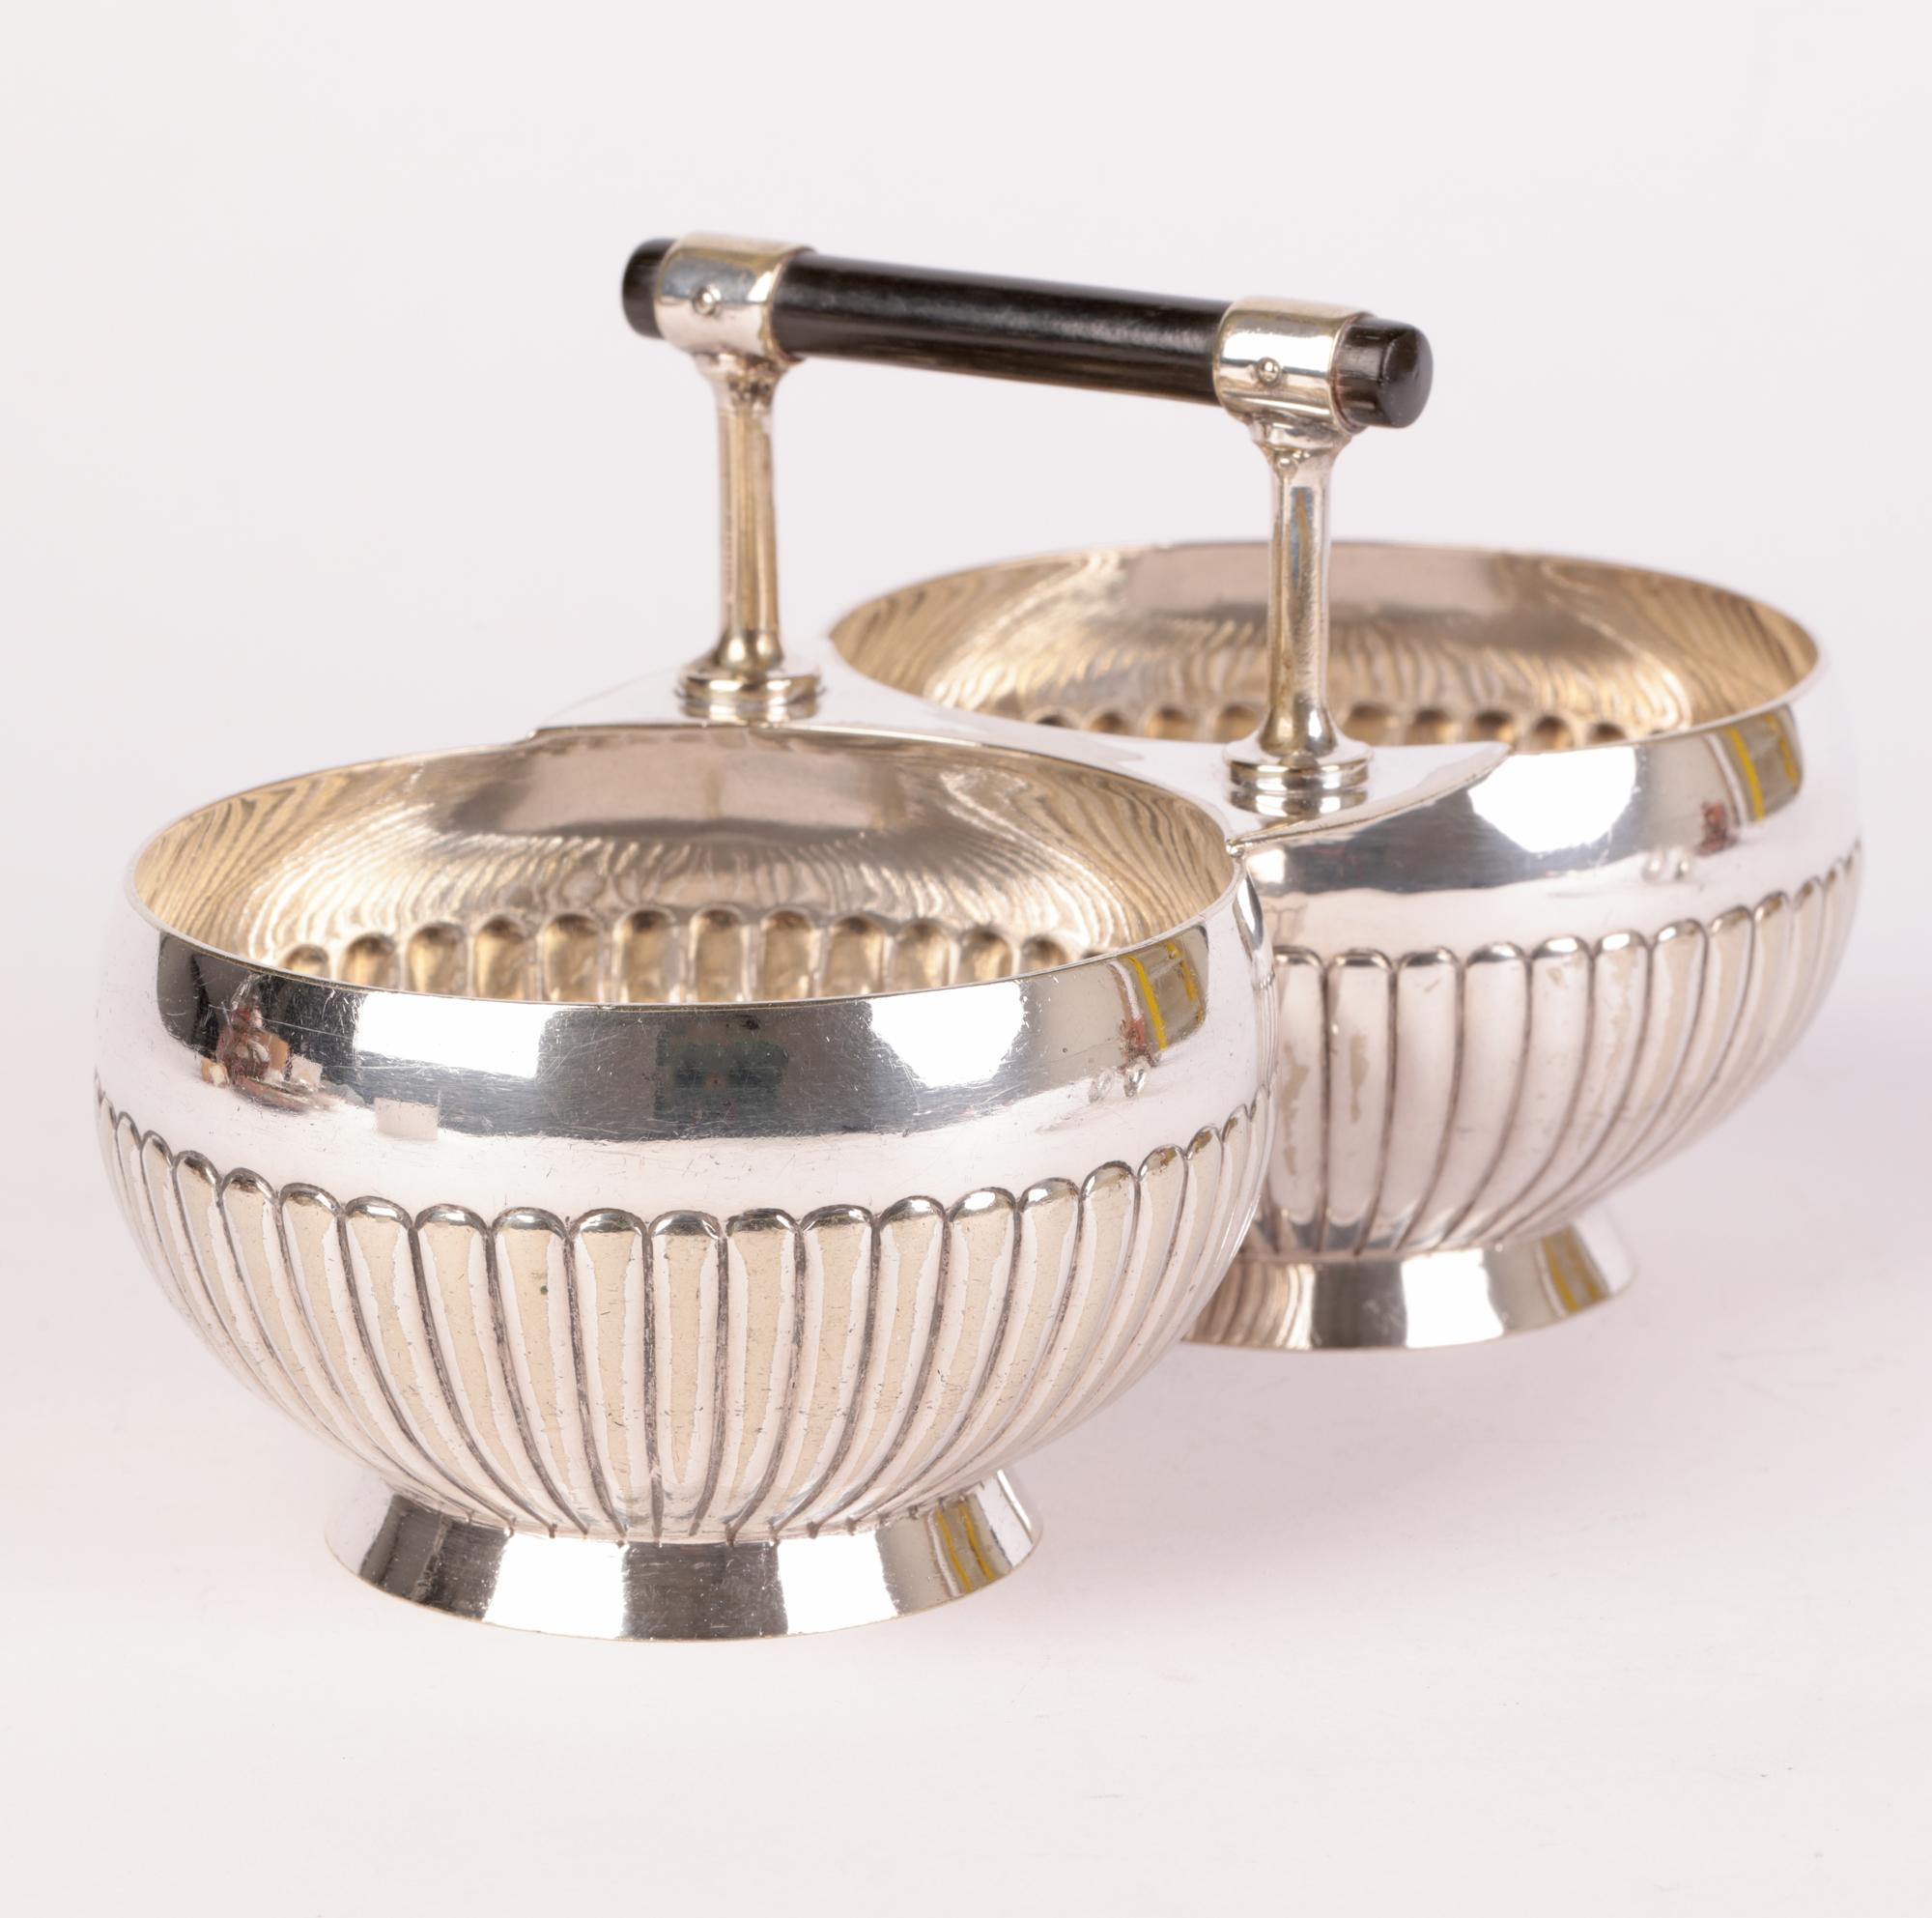 Christopher Dresser for Hukin & Heath Silver Plated Sugar Bowl with Ladles 2